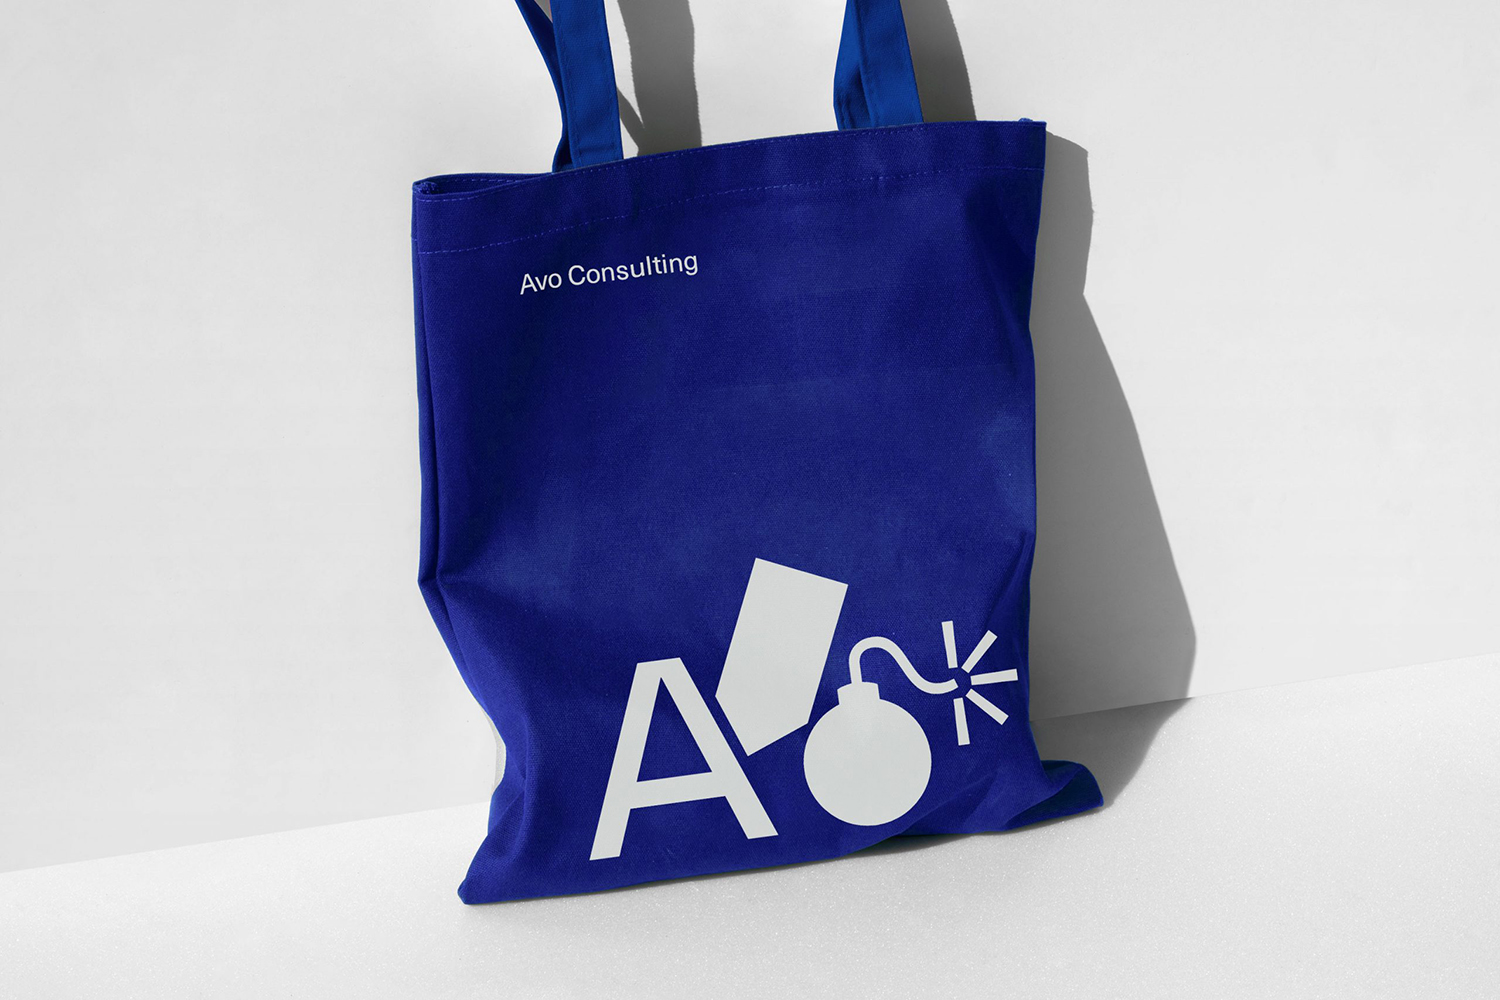 New logo, custom typeface, posters, banners, supergraphics and tote bags for Nordic technology and management consultancy Avo designed by Blee